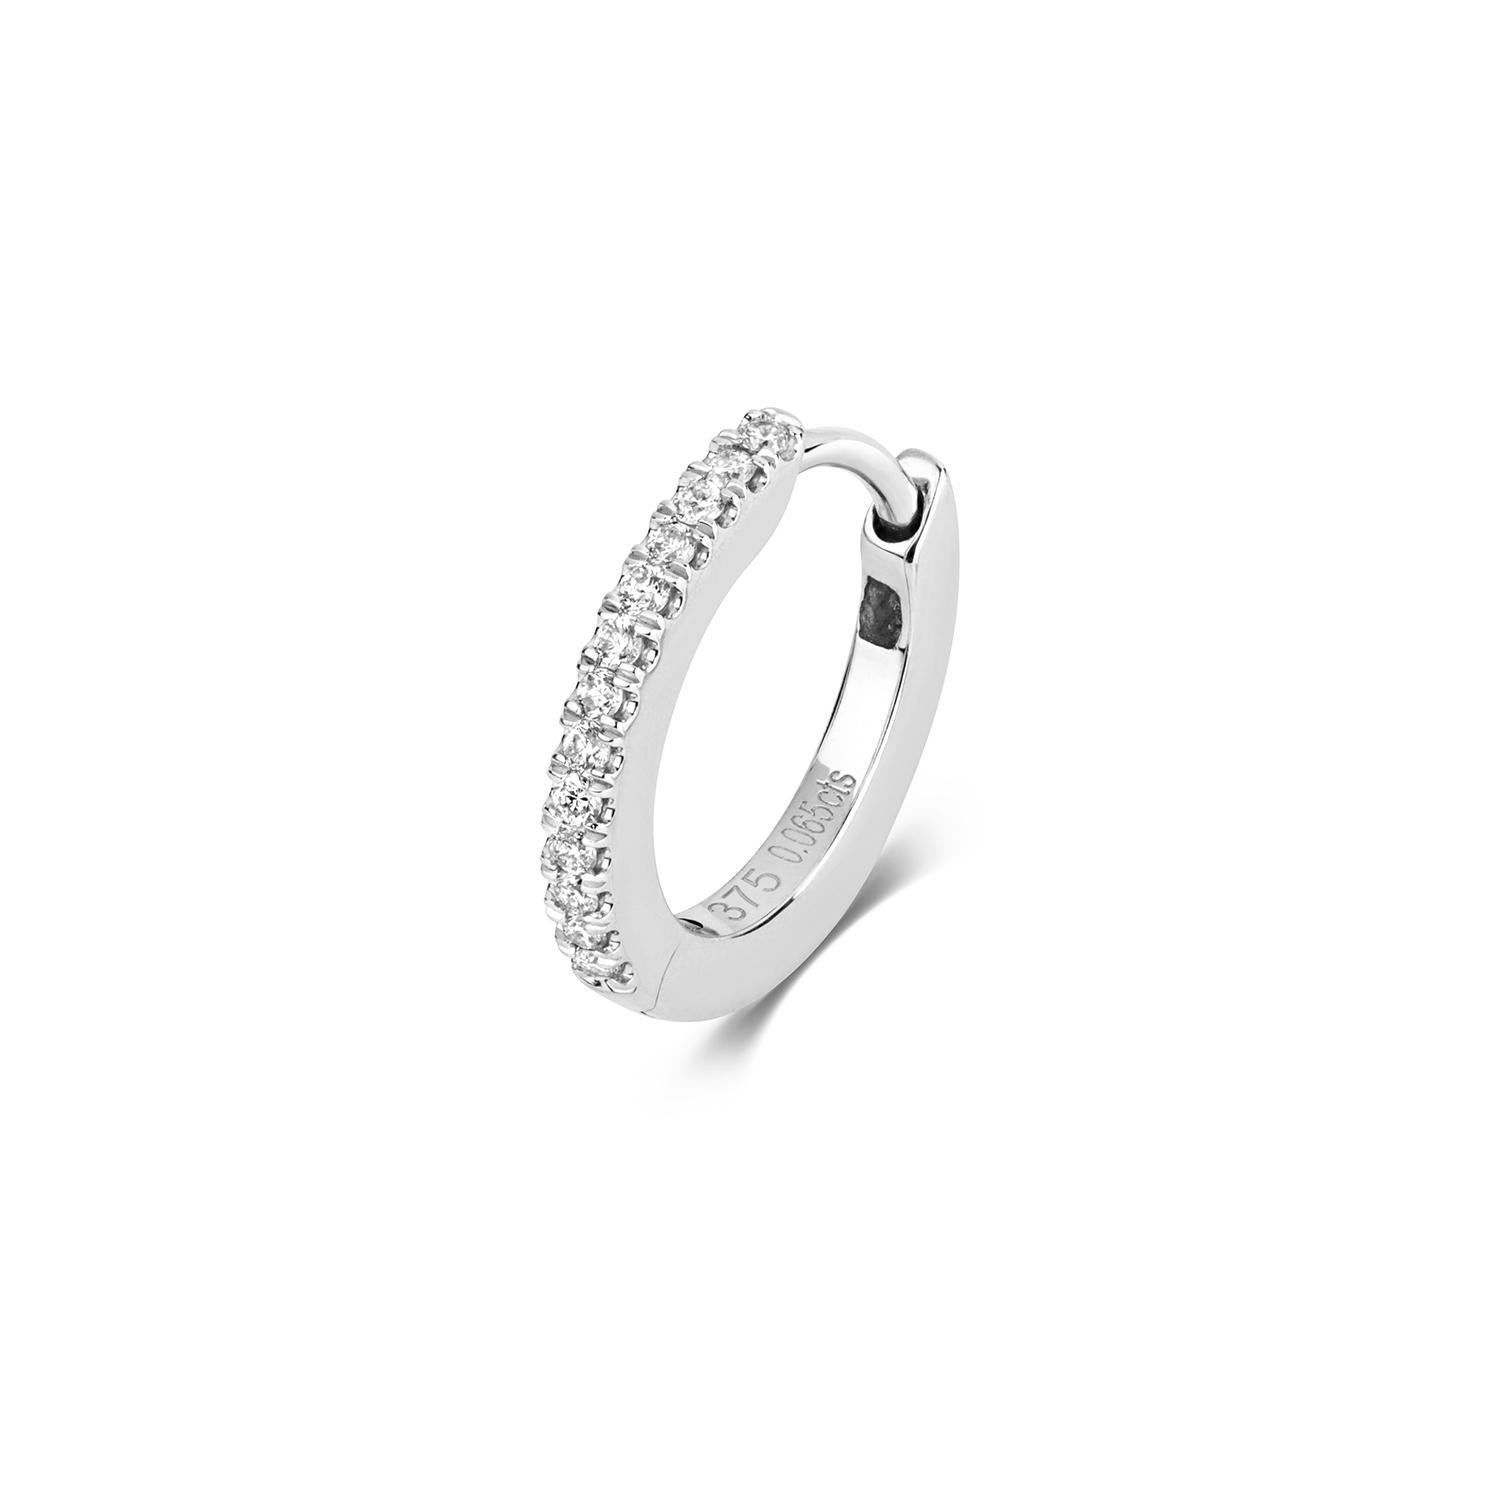 DIAMOND CARTILAGE HOOP

9CT W/G GH SI3-I1 0.06CT

Weight: 0.9g

Number Of Stones:13

Total Carates:0.060